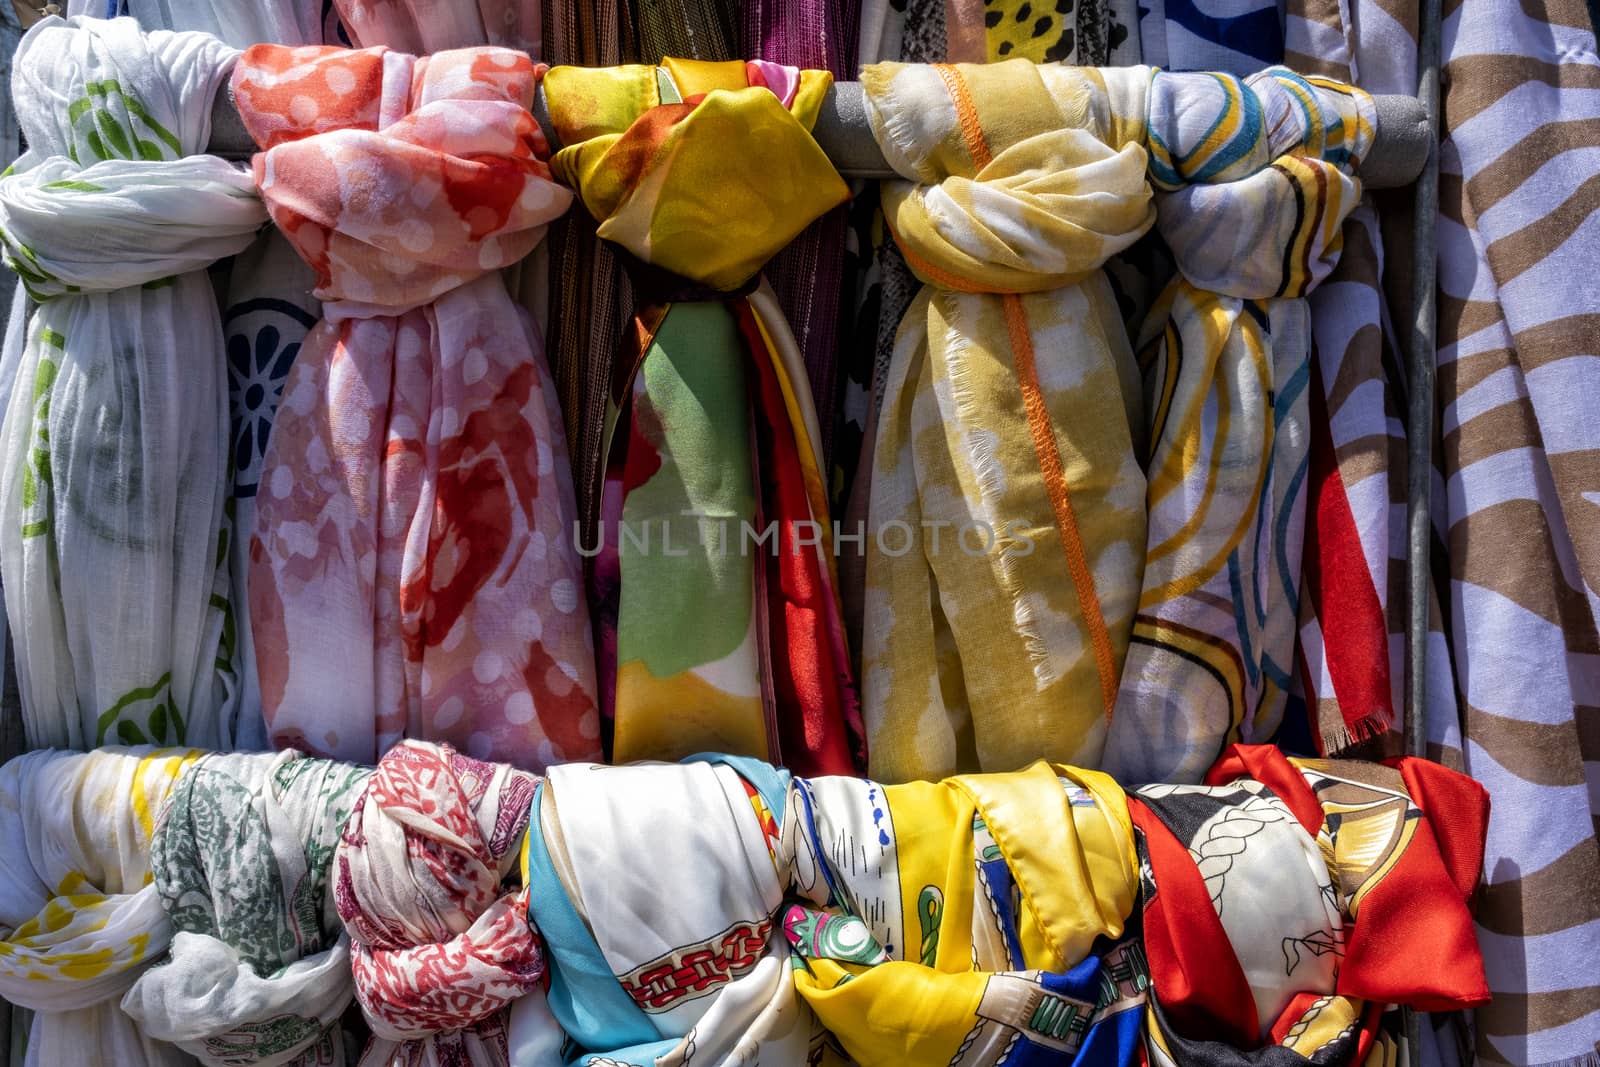 Colorful scarves at a market in the Netherlands. Colors of textiles